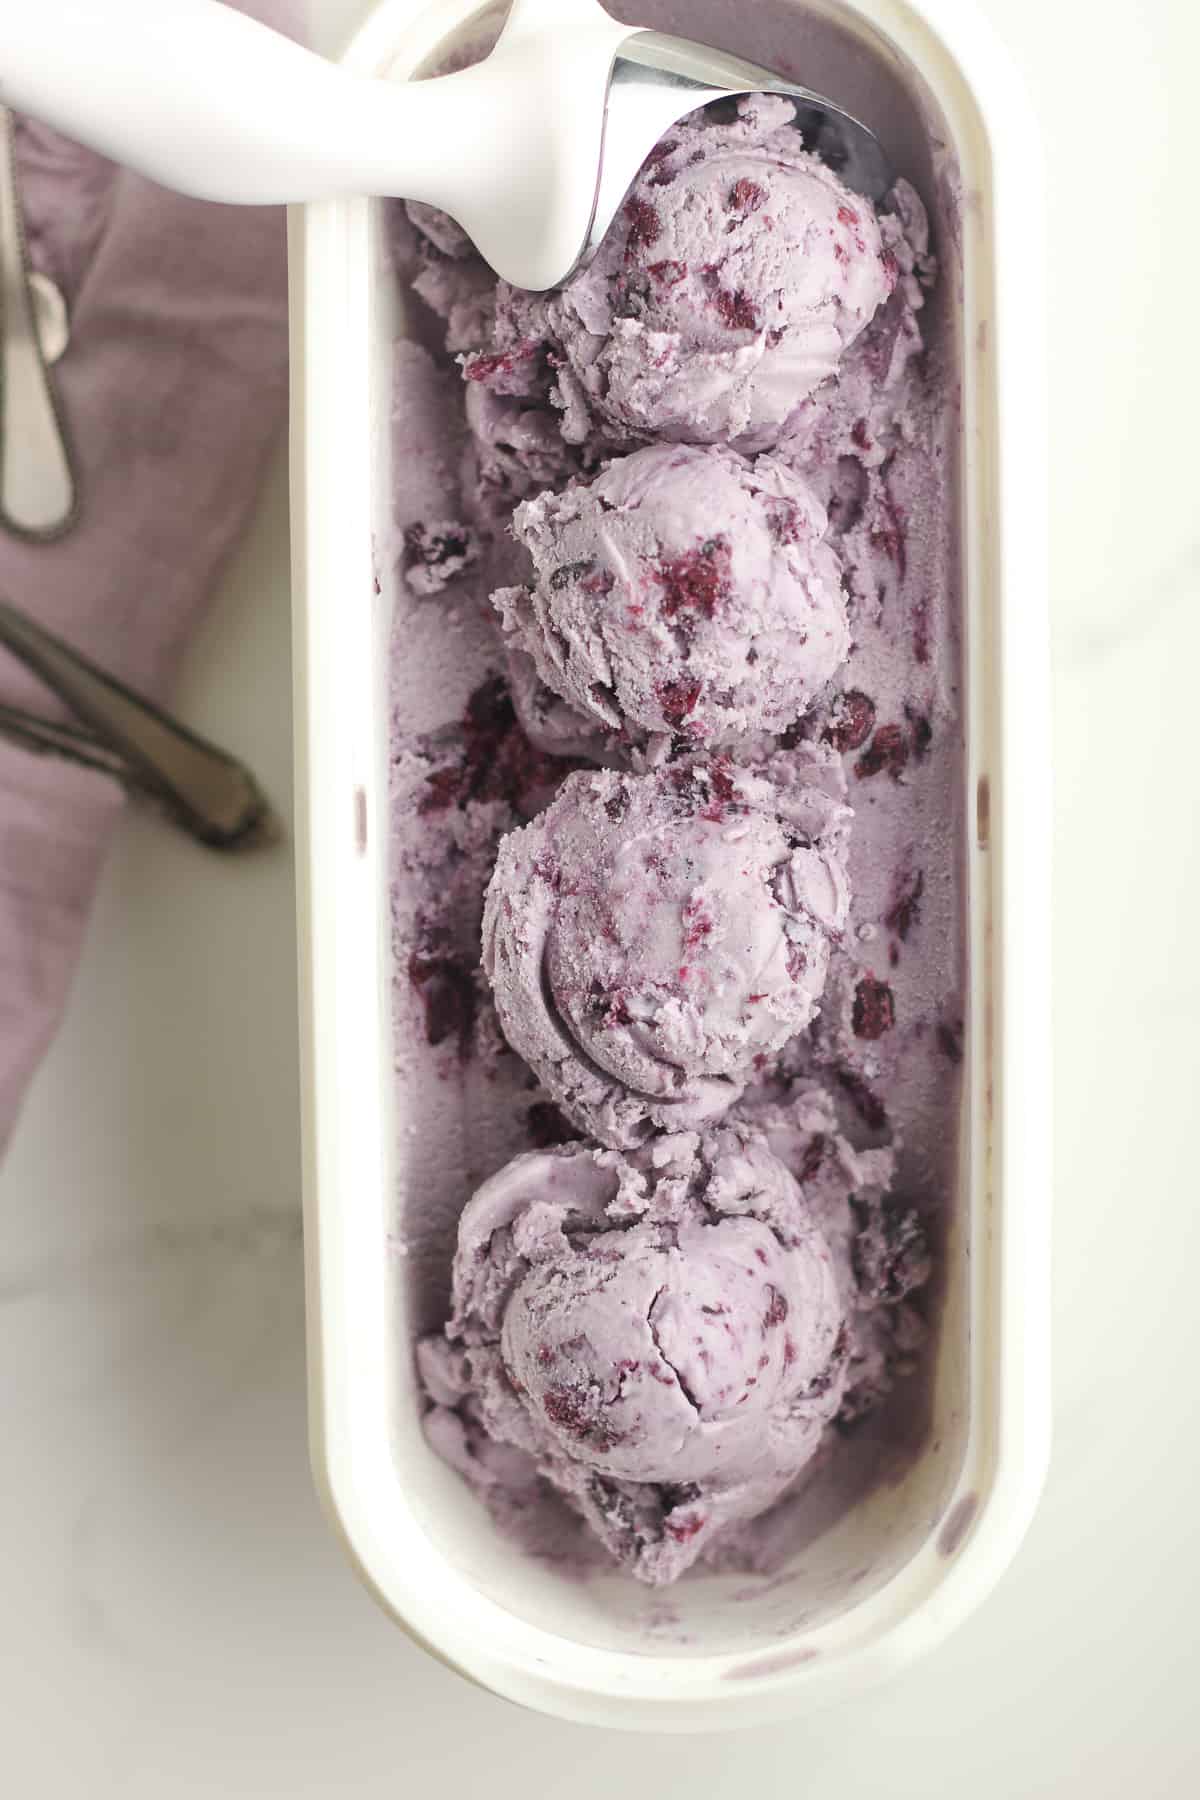 An oblong white container of blueberry ice cream, formed into four scoops.